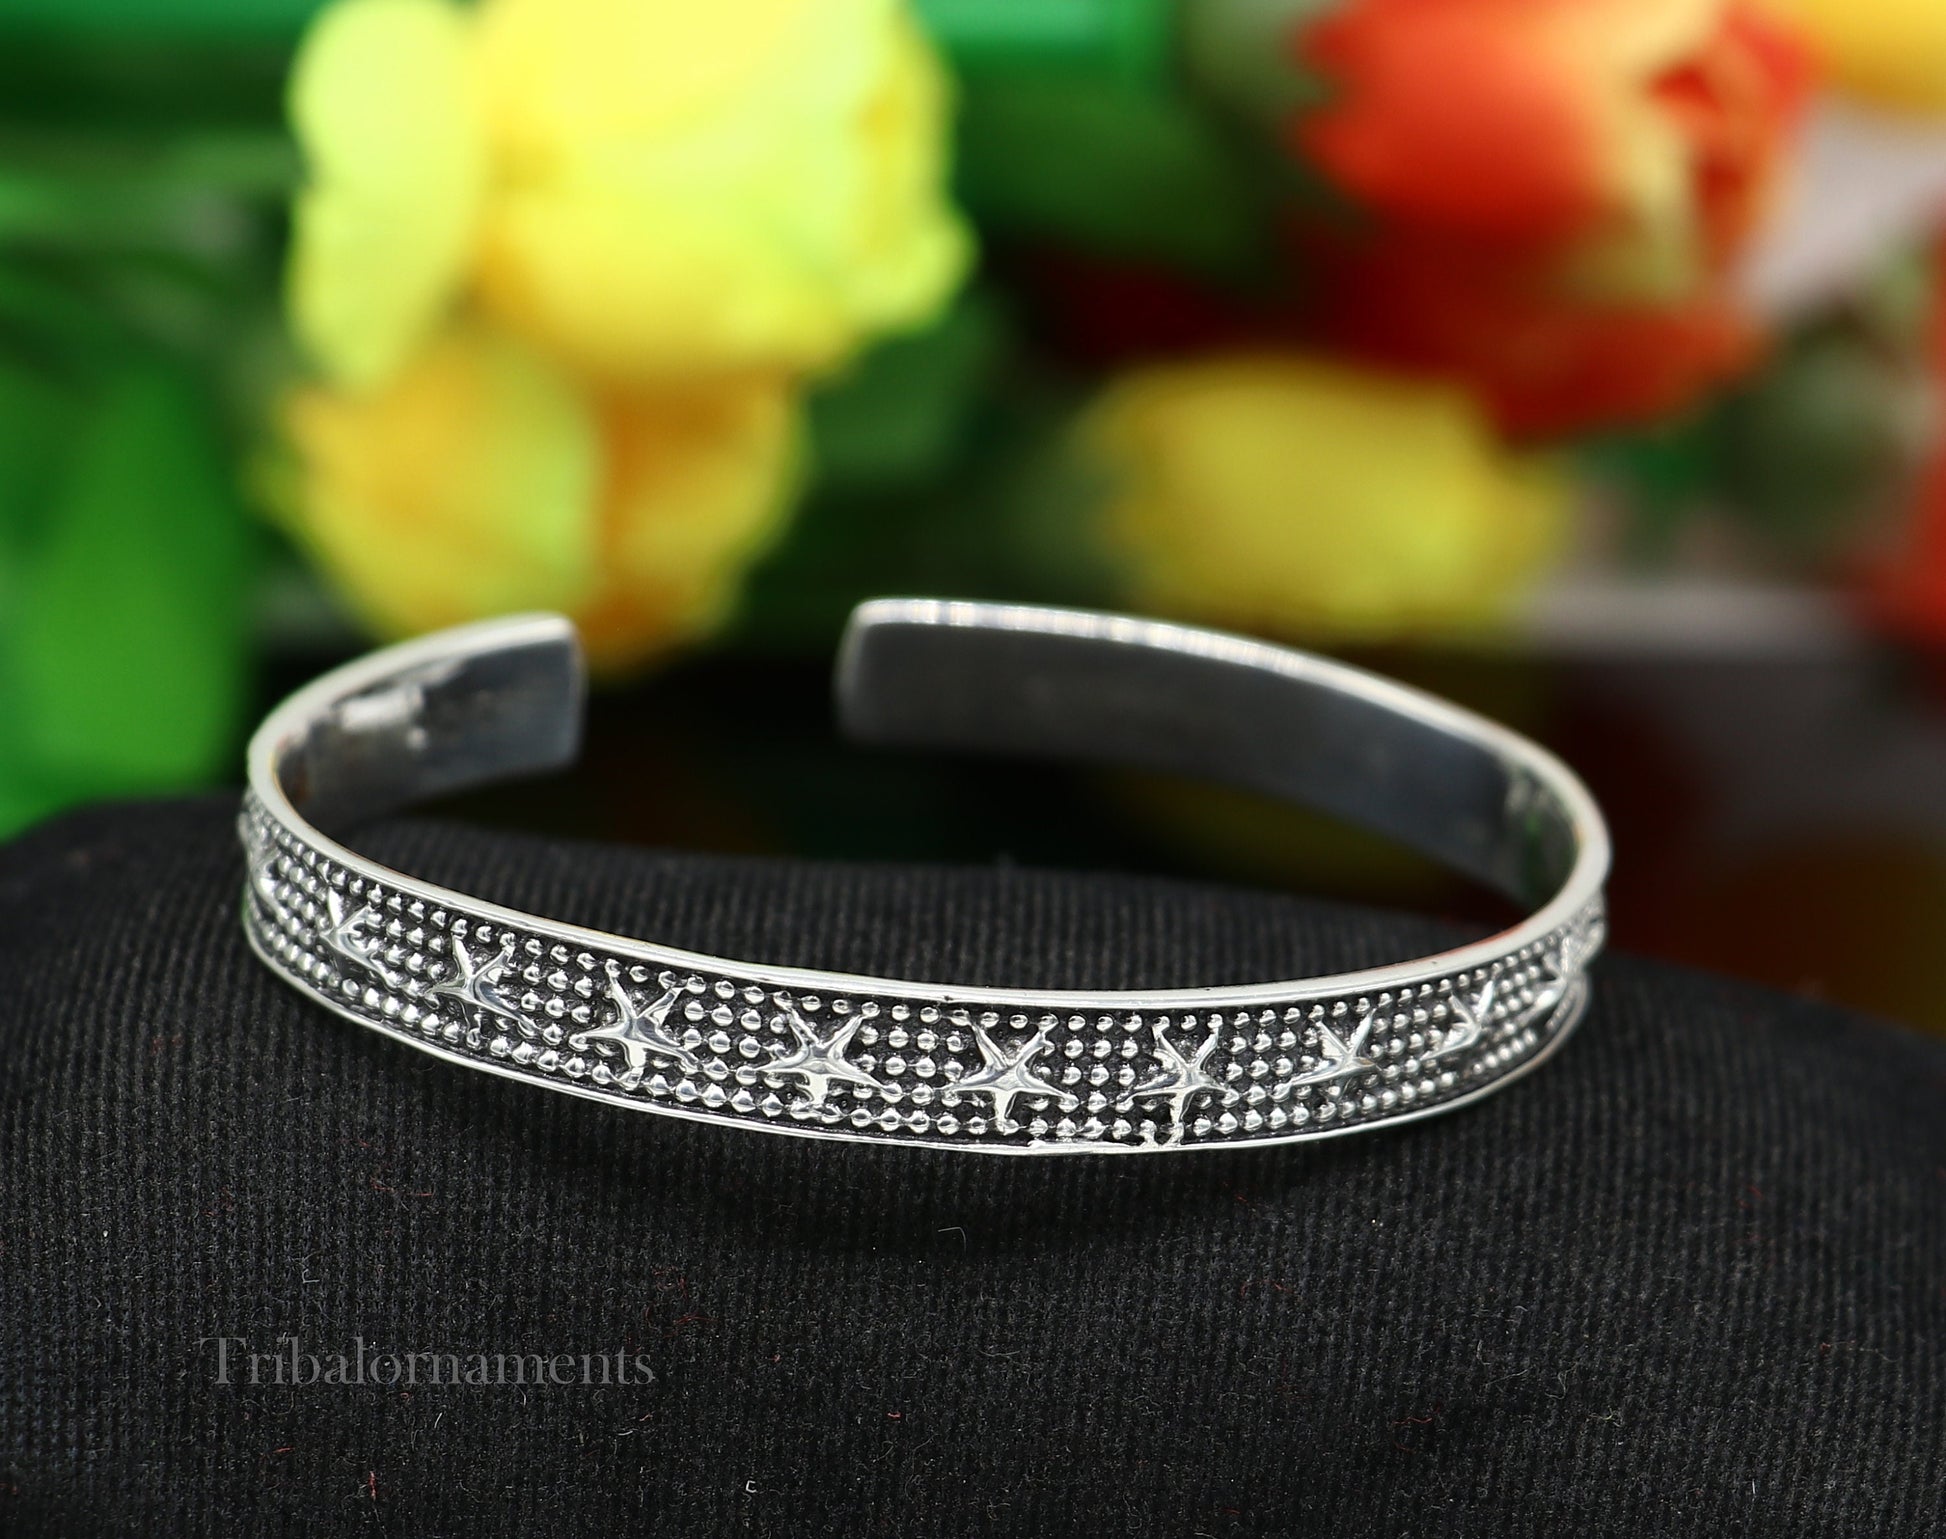 925 sterling silver handmade open face cuff bangle bracelet gifting solid adjustable jewelry, best gift cuff bracelet from india nsk377 - TRIBAL ORNAMENTS